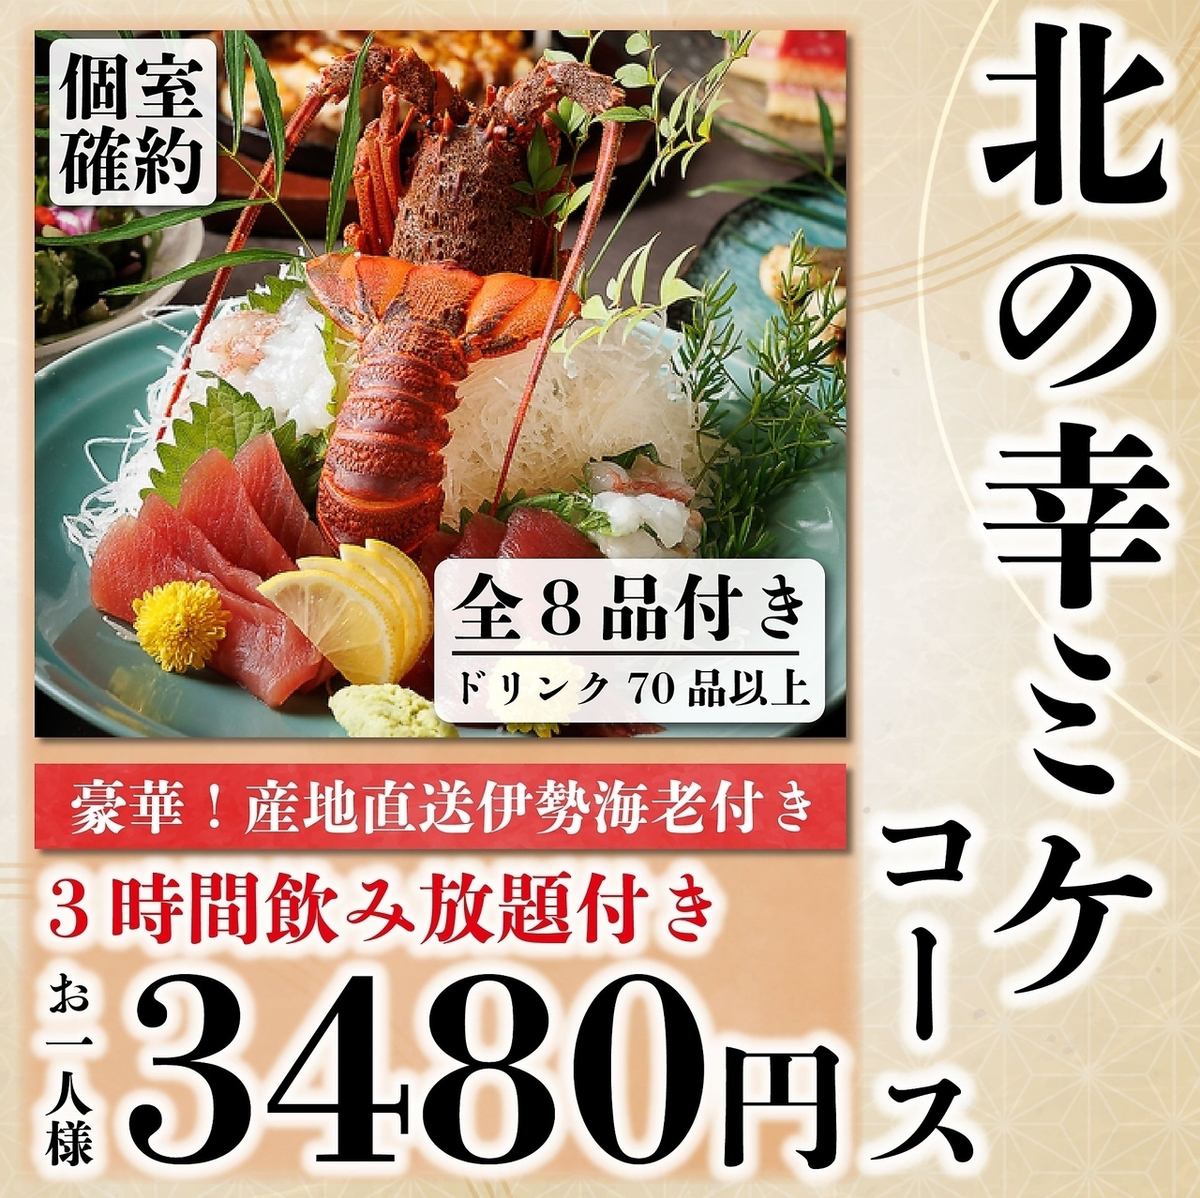 Multiple courses with all-you-can-drink for over 3 hours♪ Please enjoy slowly.